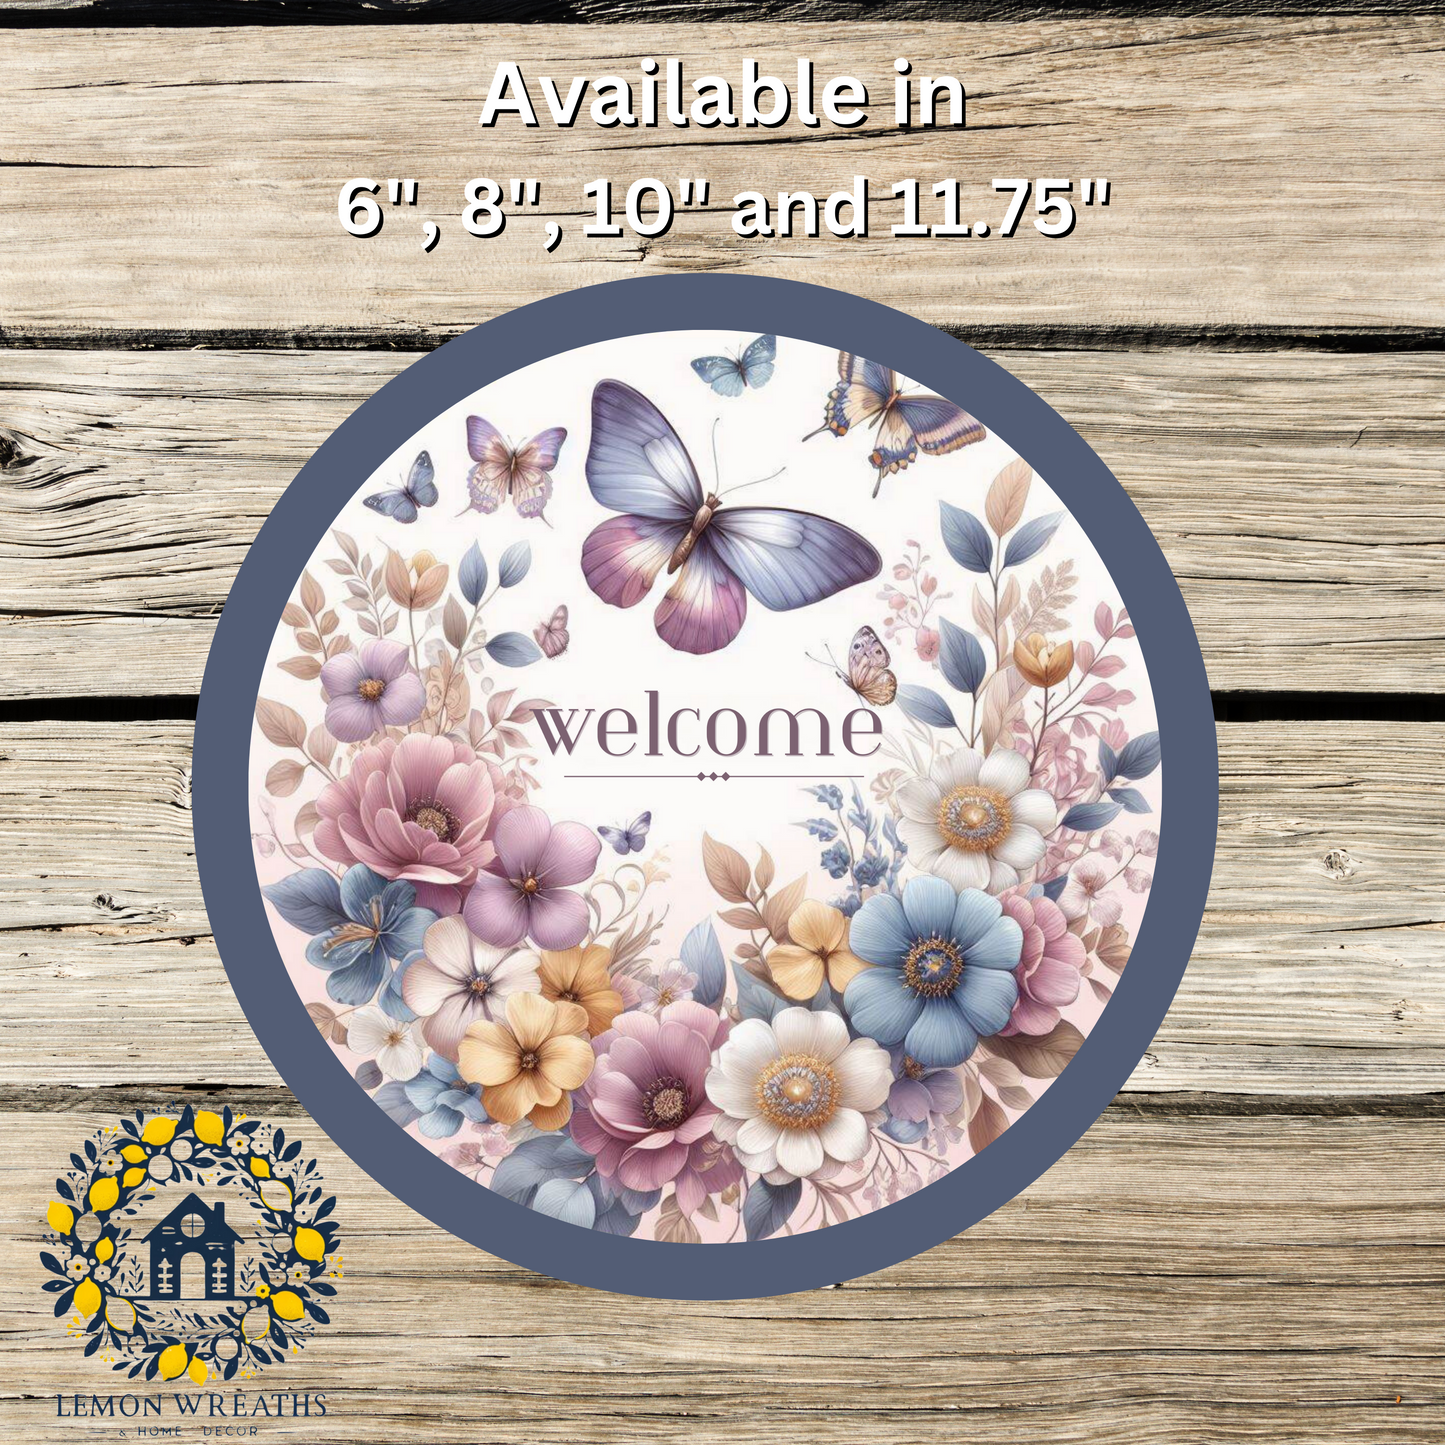 Welcome Butterflies and Magnolias Denim Blue Border Metal Sign